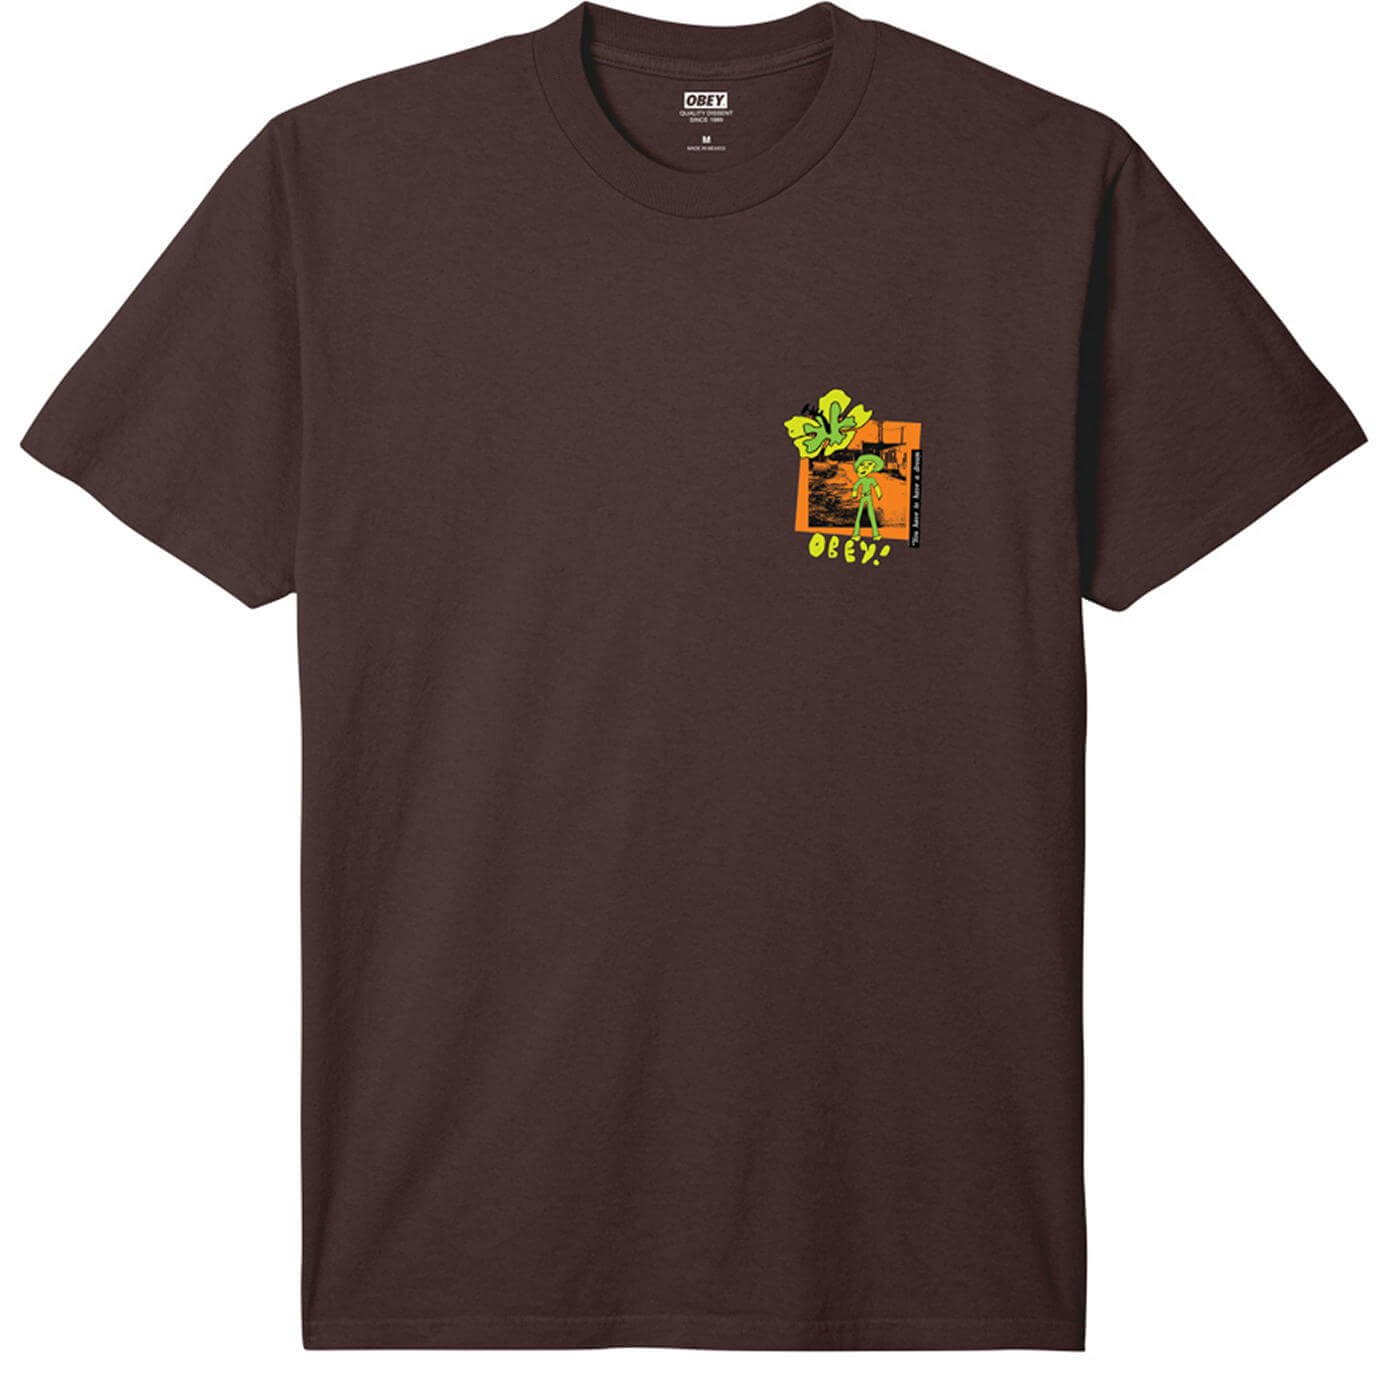 OBEY You Have To Have A Dream T-Shirt - Java Brown